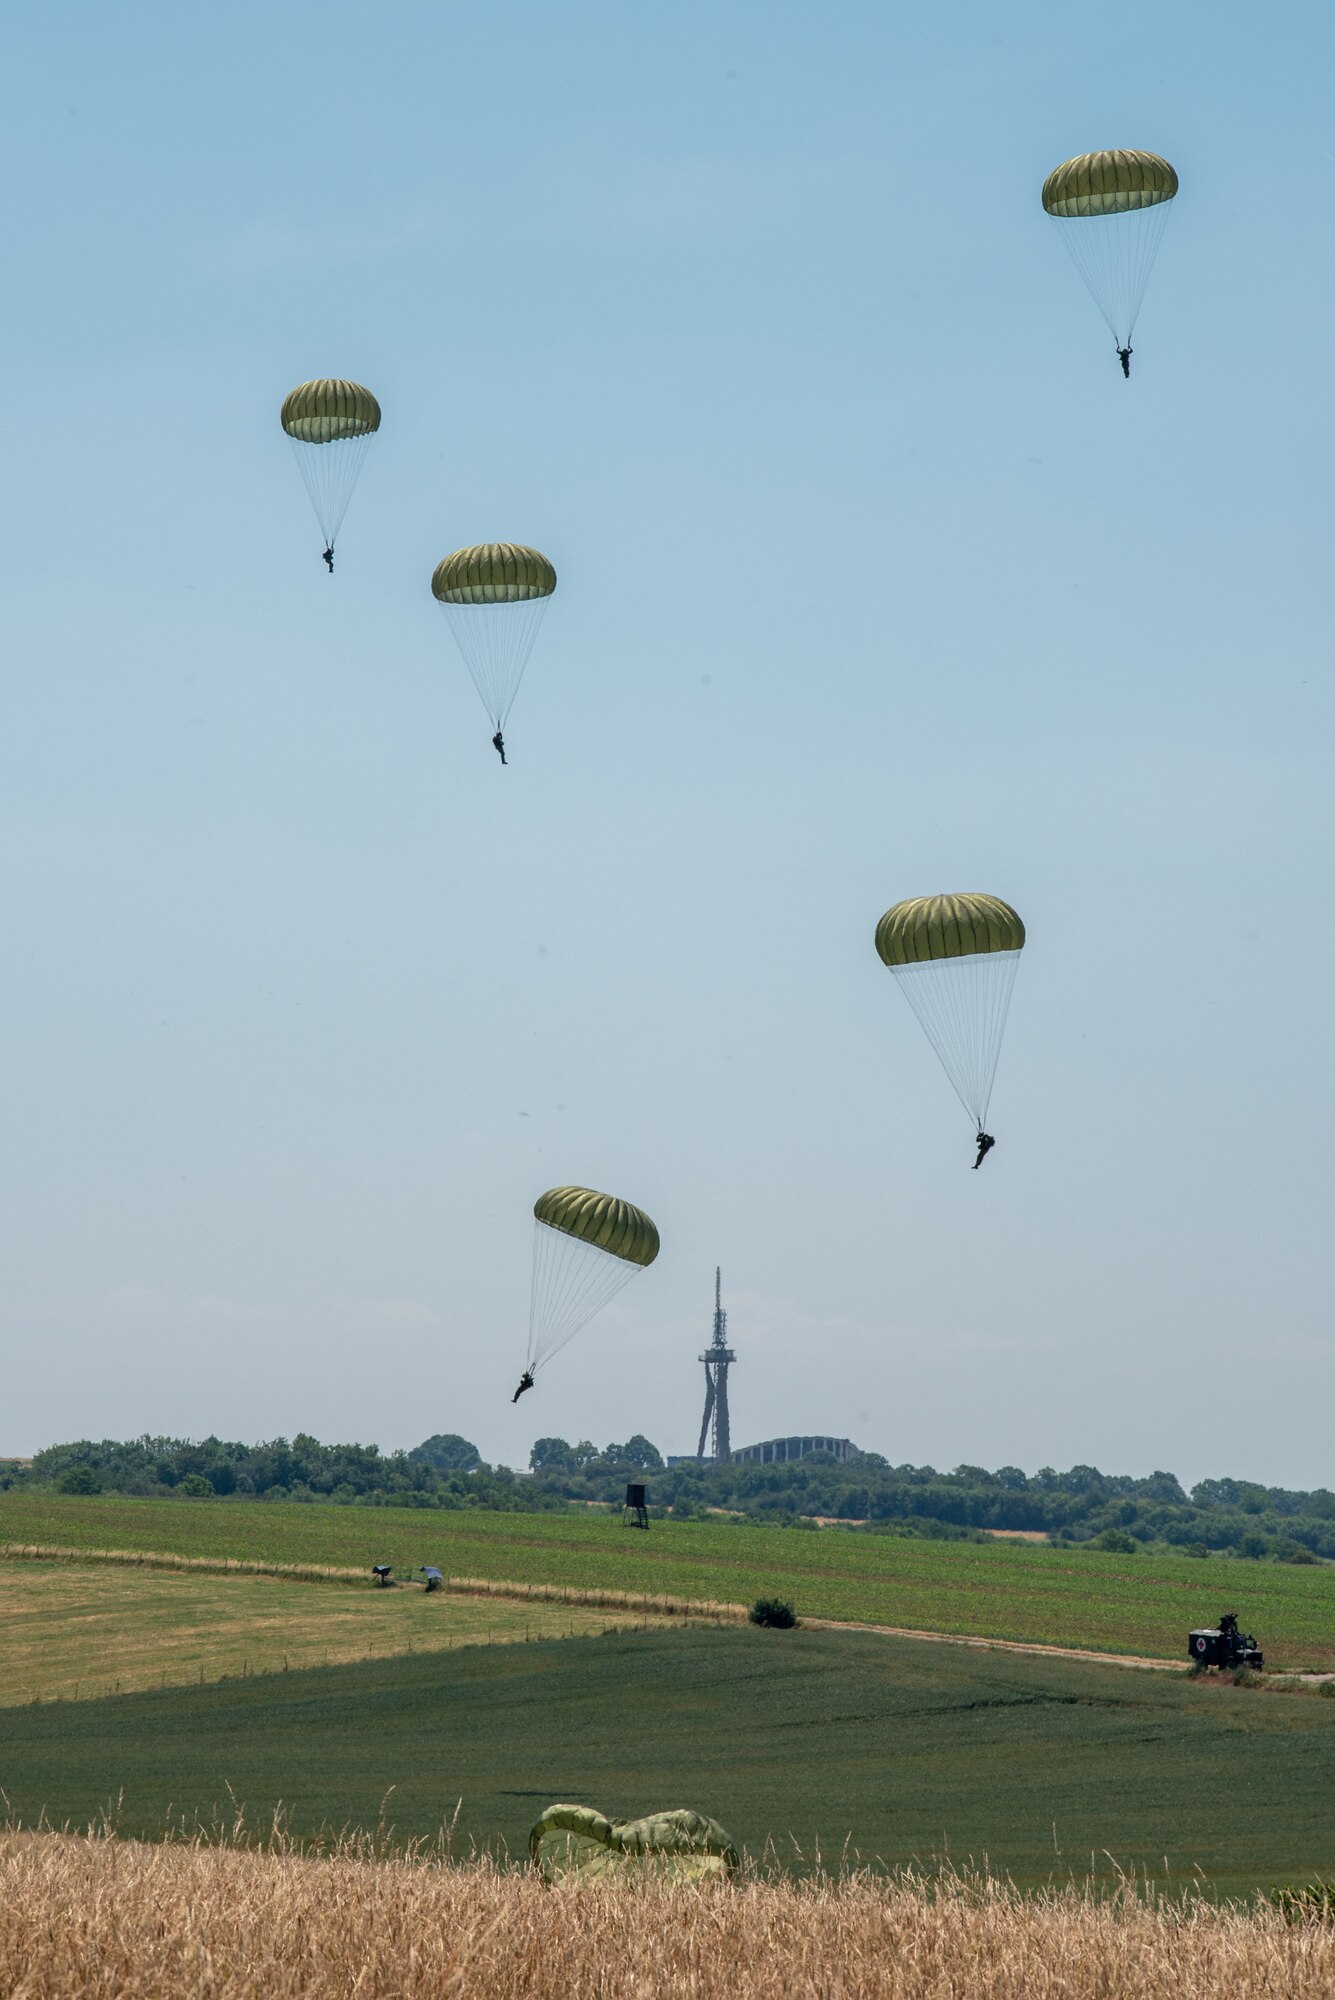 German paratroopers descend from the sky during exercise Air Defender 2023 (AD23) in Saarbrucken, Germany, June 14, 2023. Exercise AD23 integrates both U.S. and allied air-power to defend shared values, while leveraging and strengthening vital partnerships to deter aggression around the world. (U.S. Air National Guard photo by Master Sgt. Phil Speck)